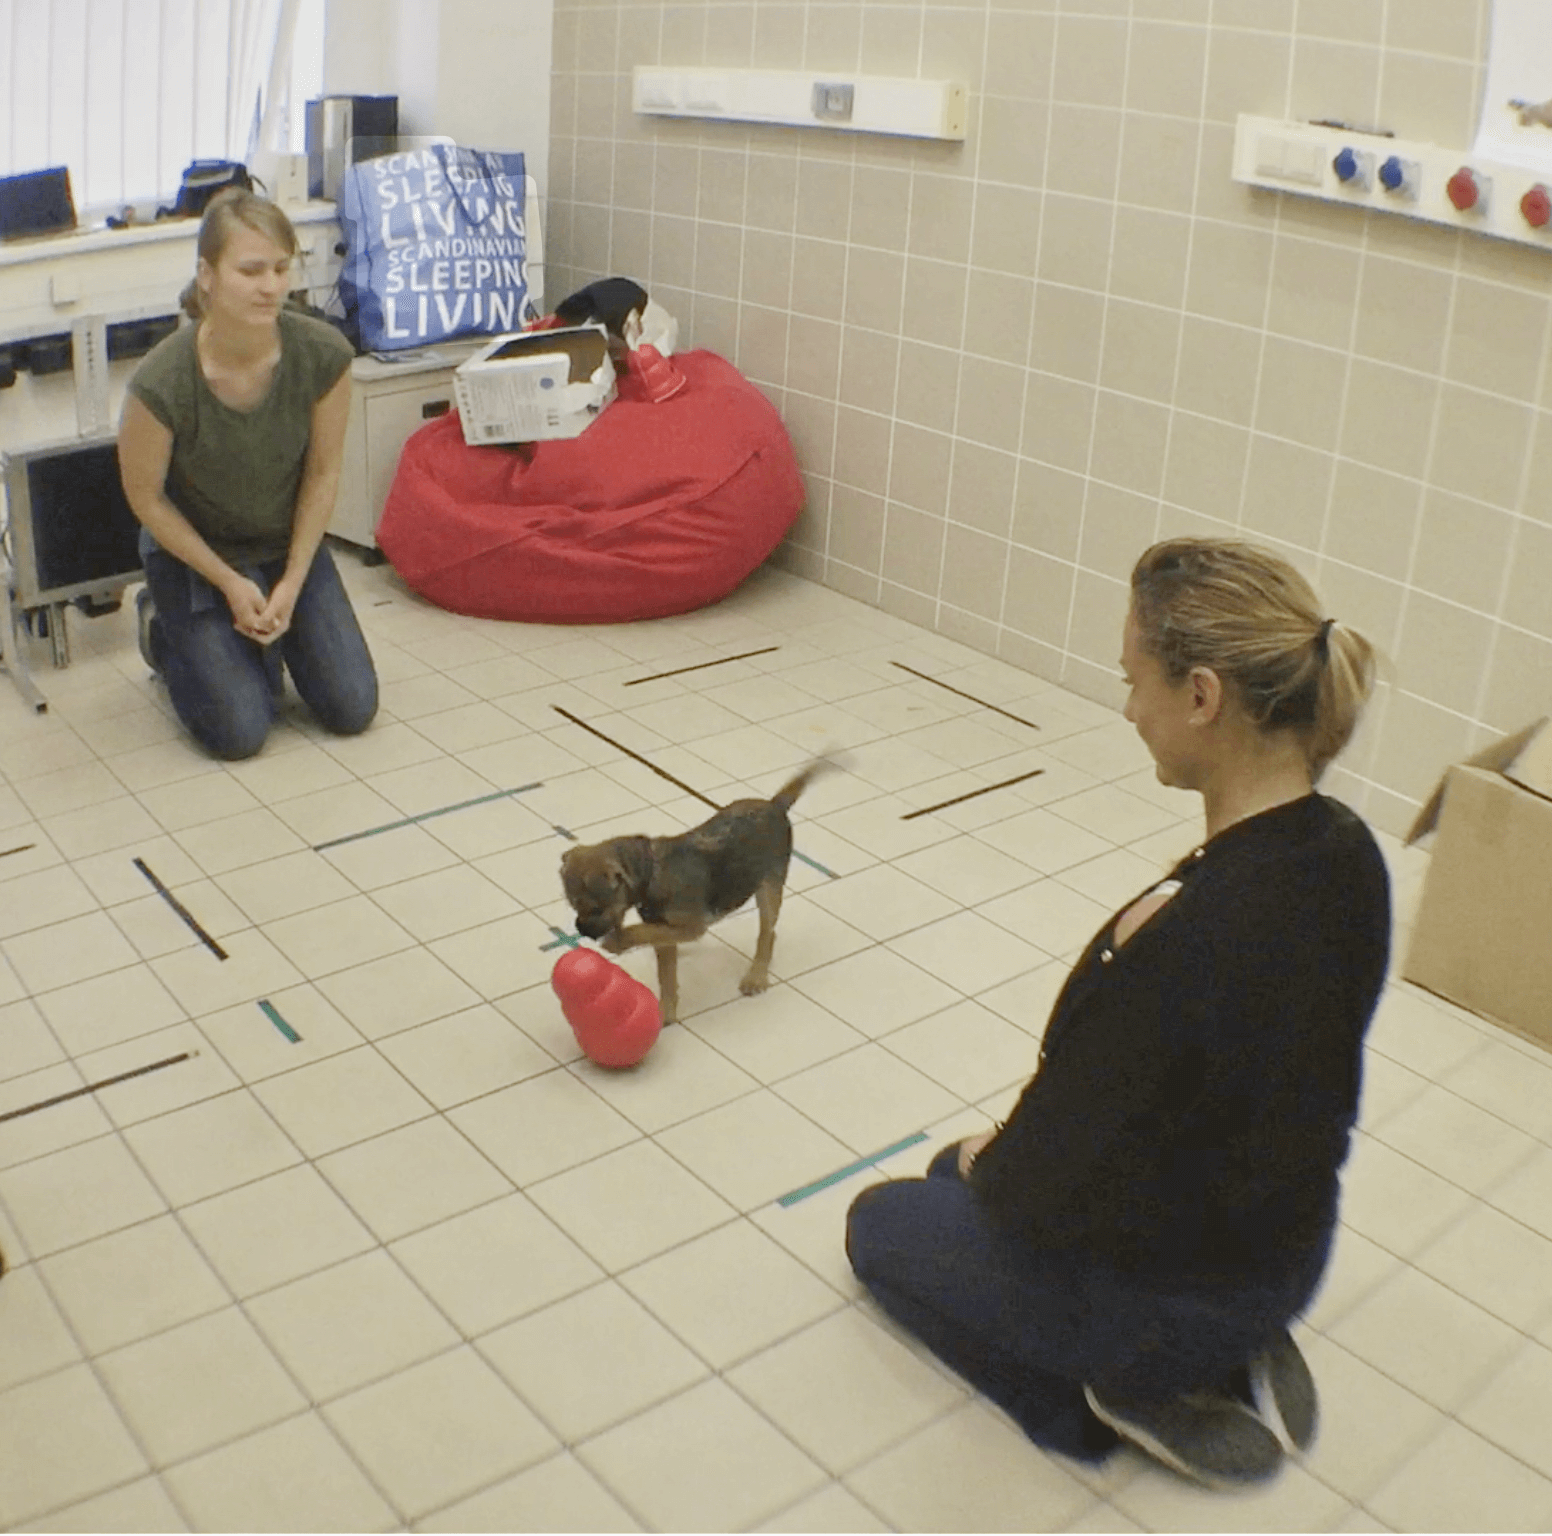 A dog plays with a round toy